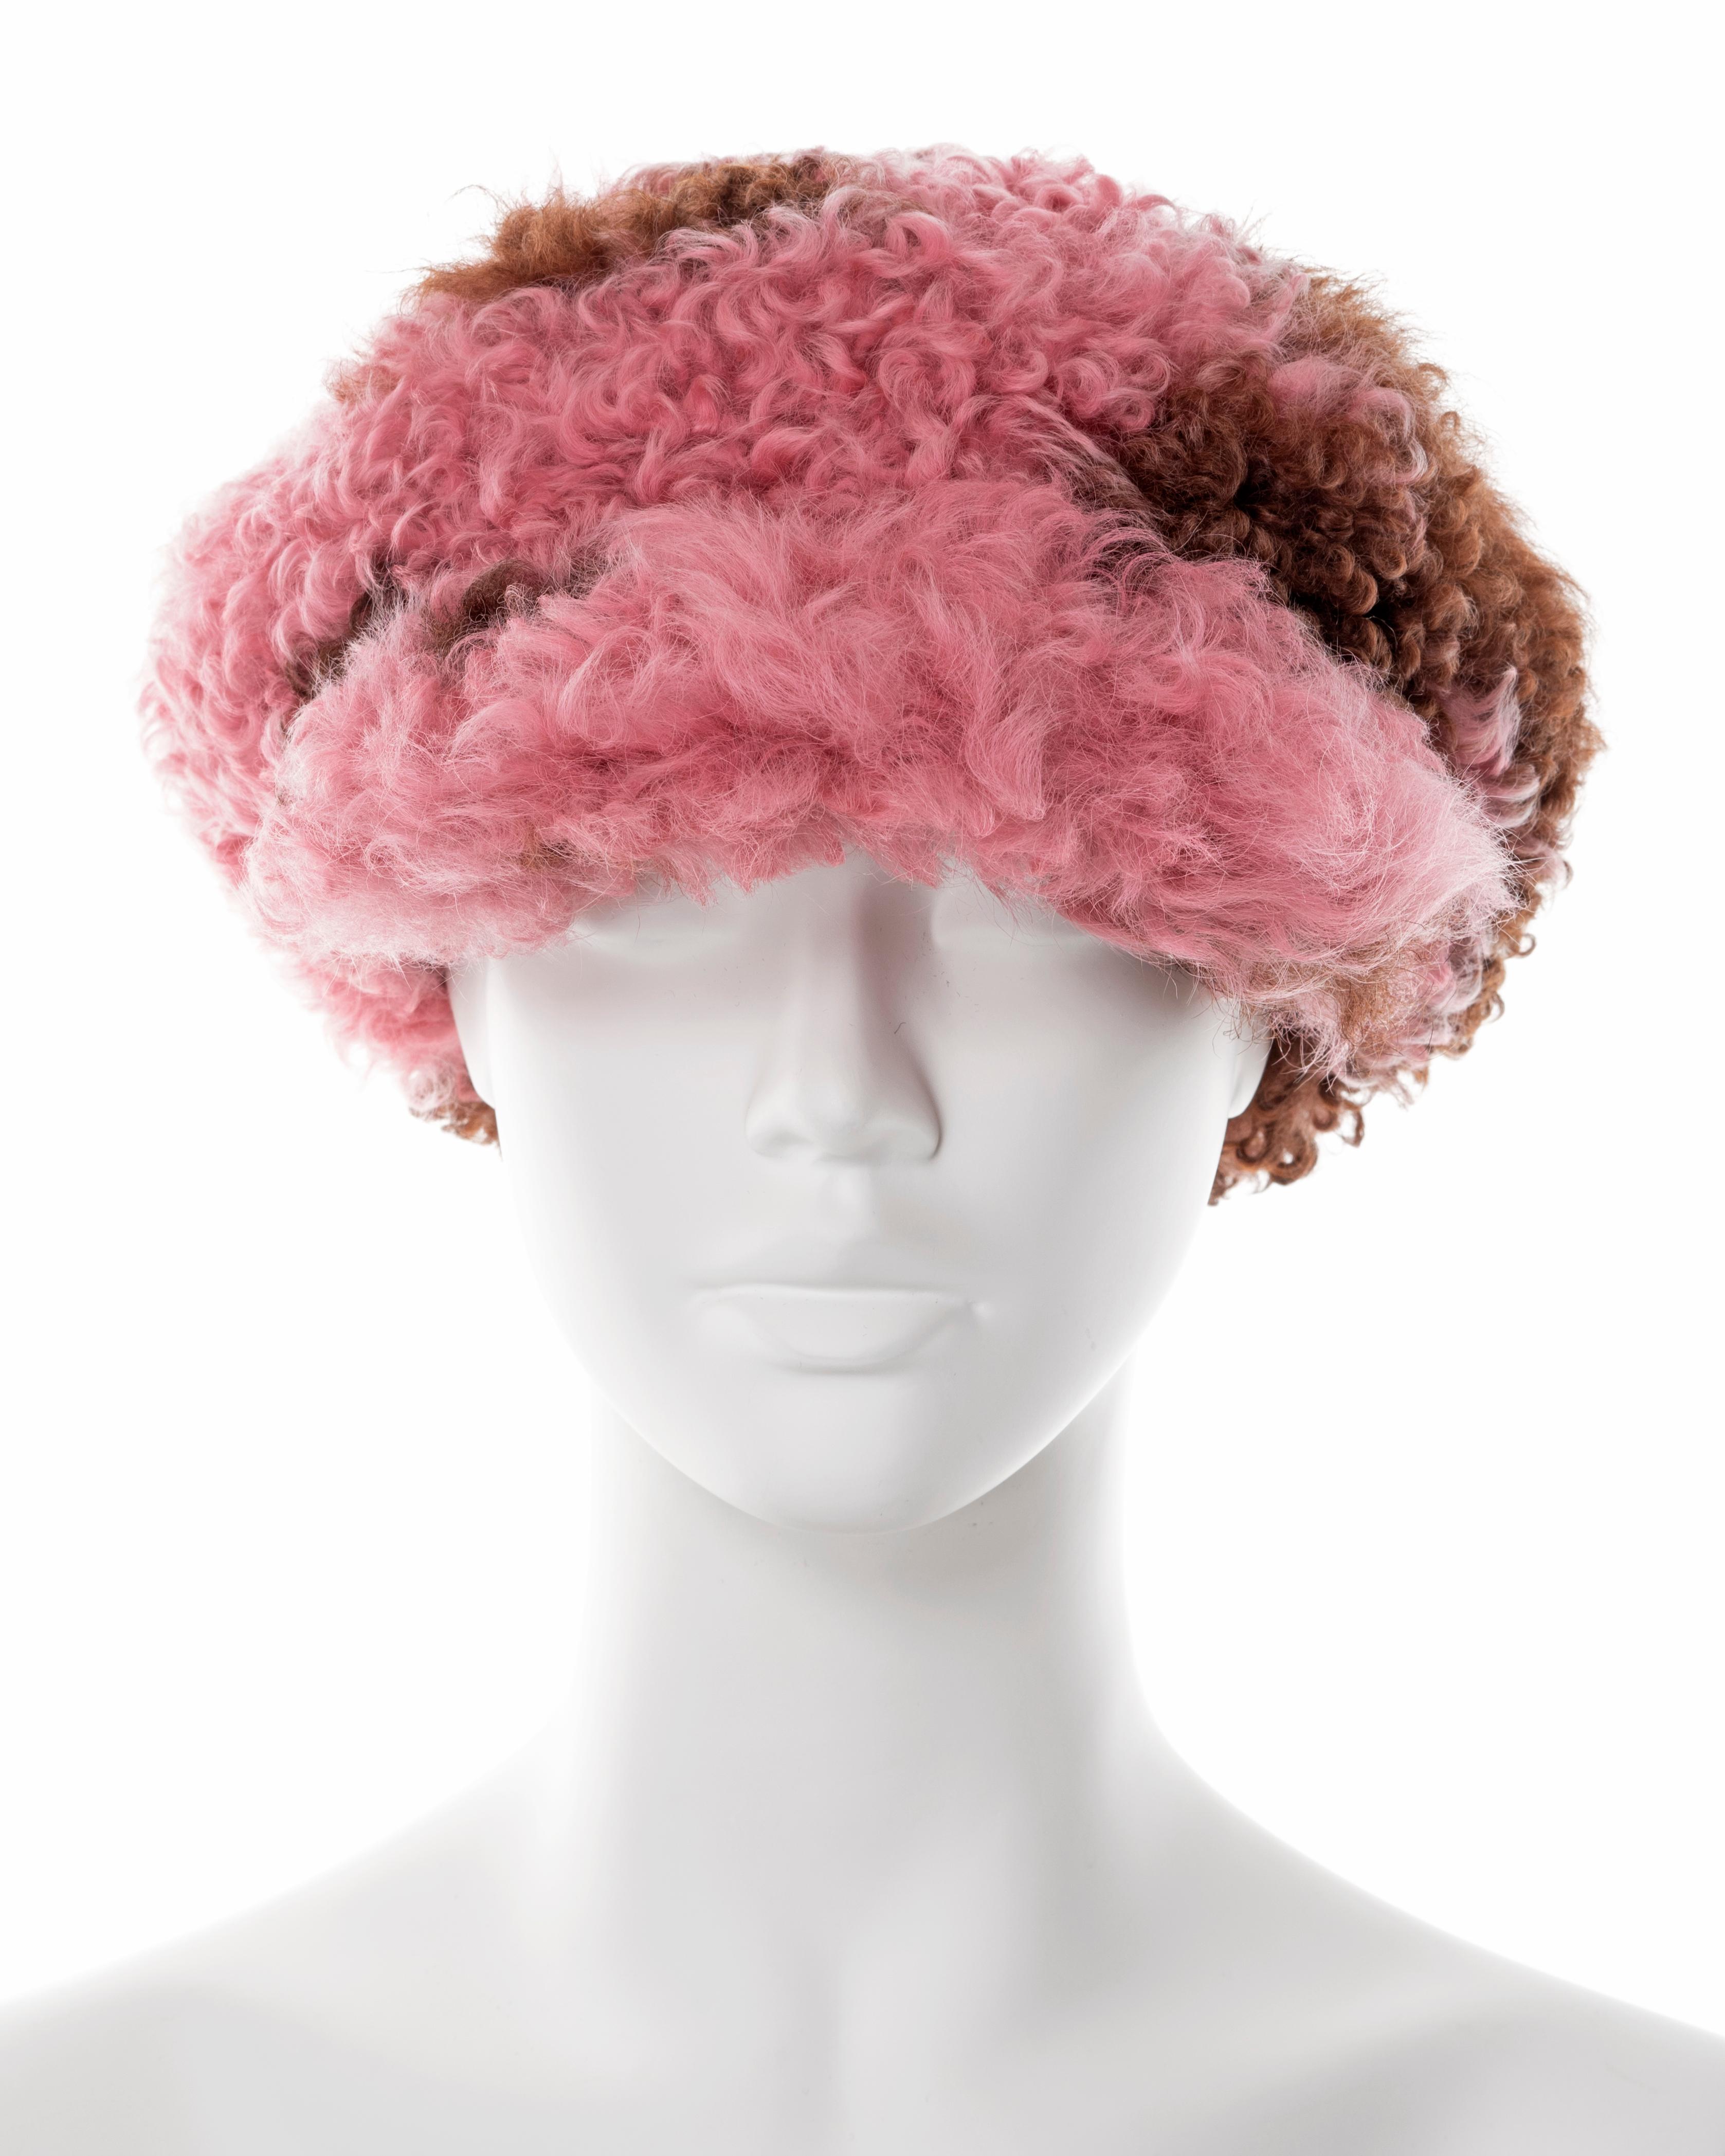 ▪ Prada 'newsboy' hat 
▪ Sold by One of a Kind Archive
▪ Fall-Winter 2017
▪ Constructed from pink and brown curly shearling 
▪ Brown silk lining 
▪ Size Medium
▪ Made in Italy

All photographs in this listing EXCLUDING any reference or runway